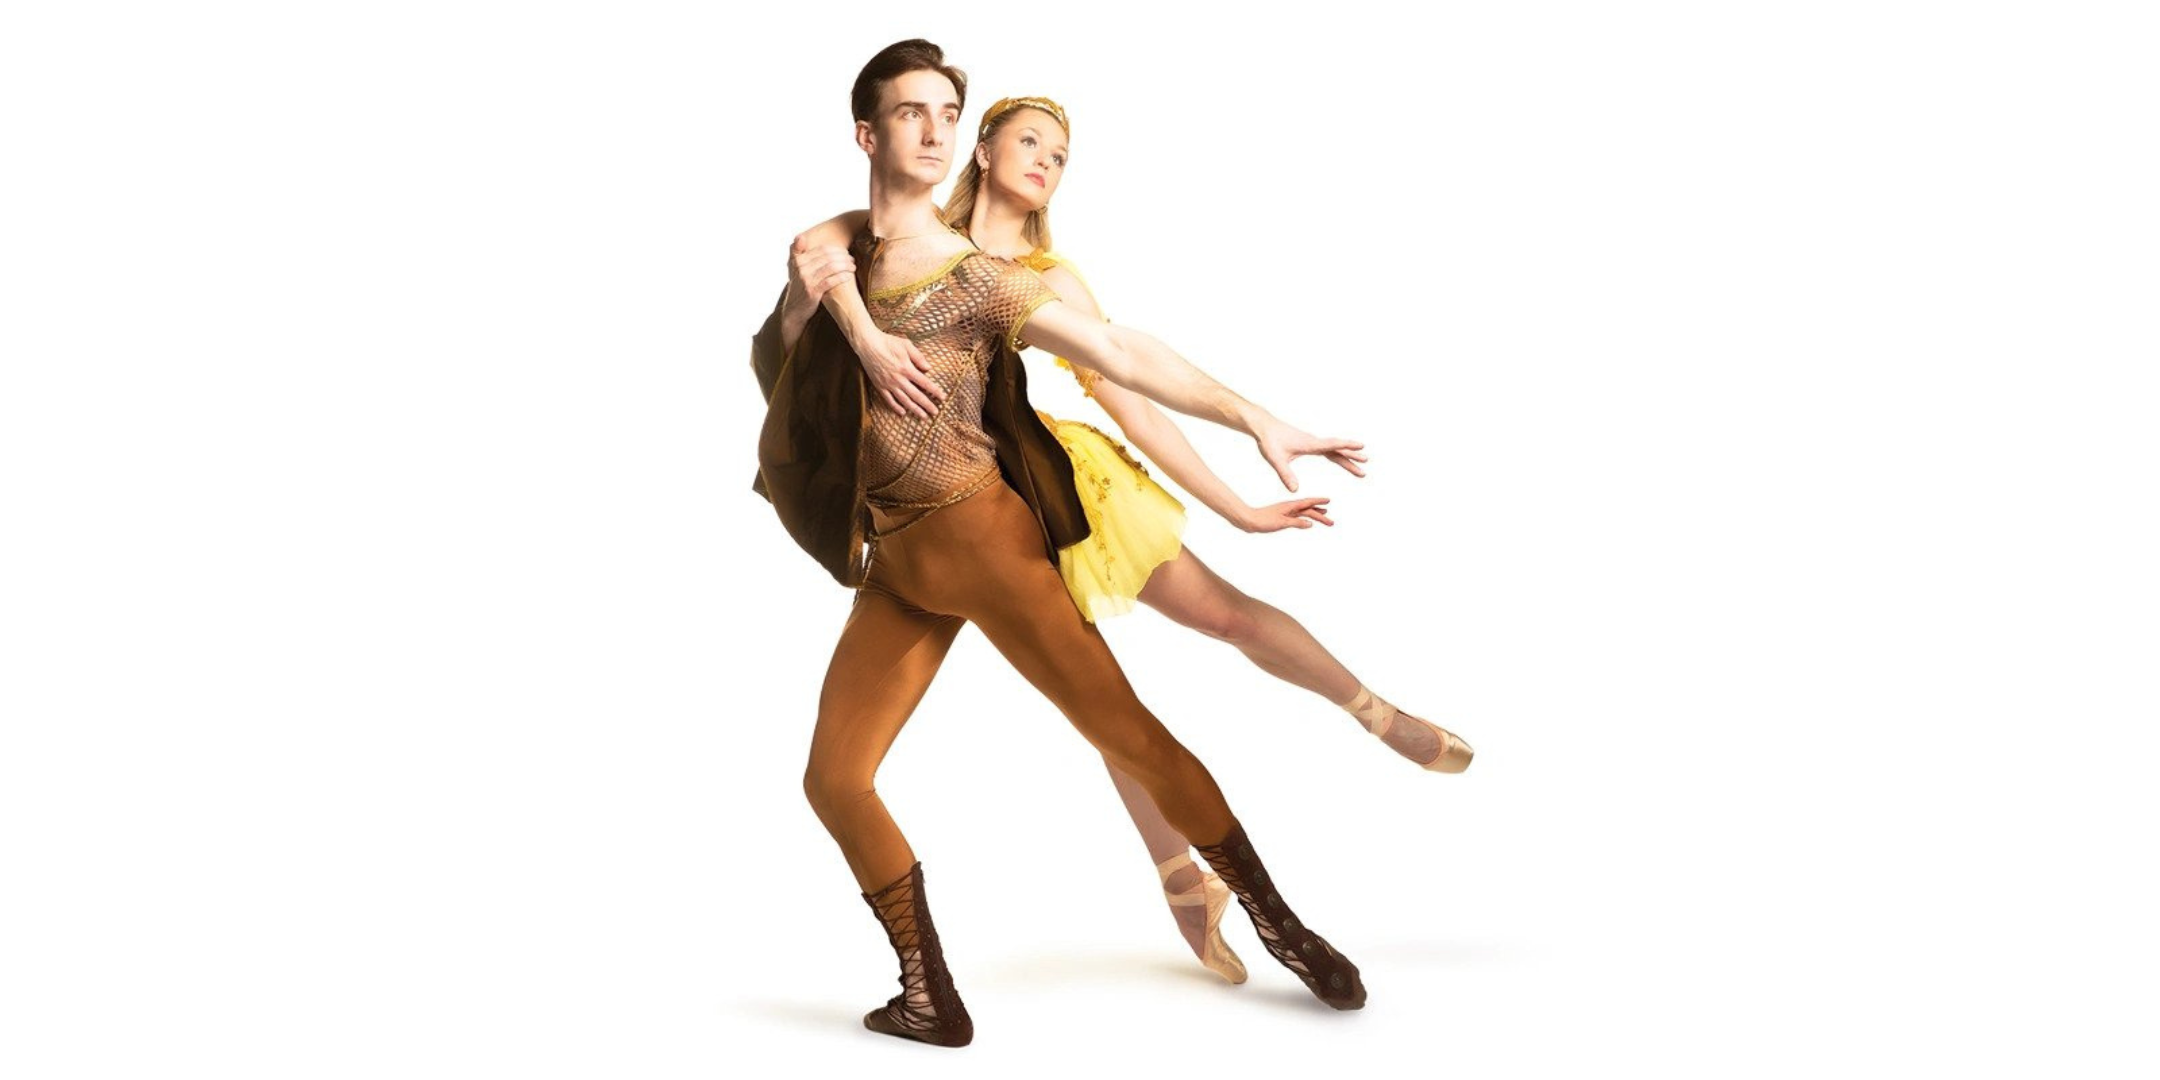 In front of a blank white background, a pair of dancers performing as Orpheus and Eurydice pose doing a pas de deux together. The man, in rust-colored tights and brown Greek-esque costuming, lunges on his right leg in tendu derriere, his left arm extending back and his right arm wrapping behind to support his partner. The woman, in a yellow Greek-esque dress, wraps her right arm around his chest as she leans on his back in a low arabesque on pointe, extending her left arm to match his line. They both look into the distance.